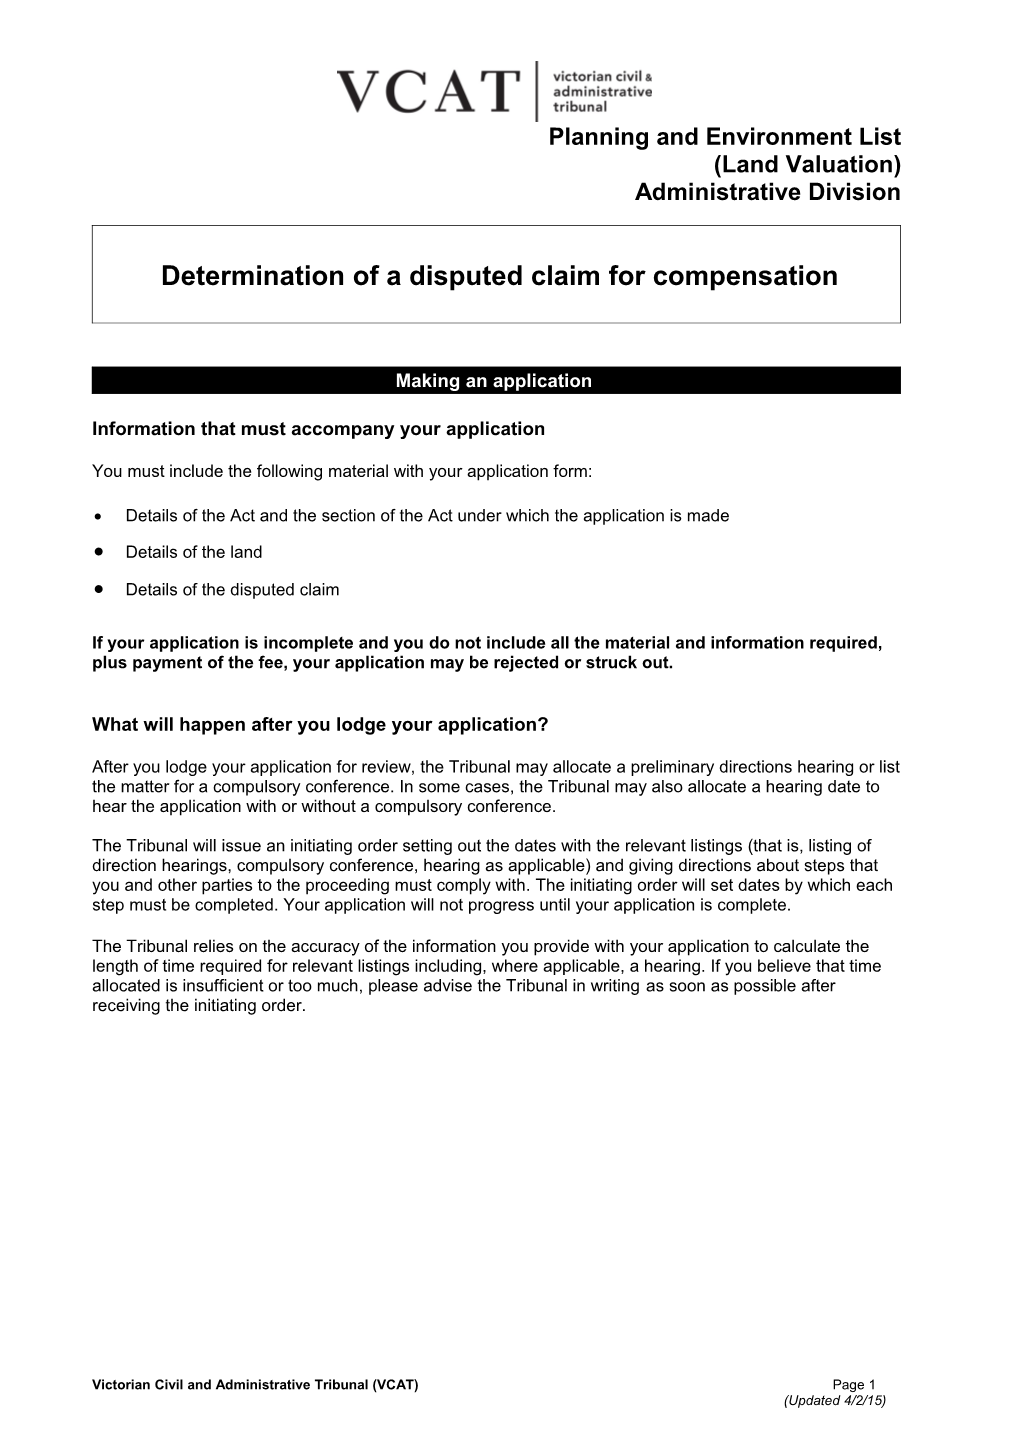 Determination of a Disputed Claim for Compensation